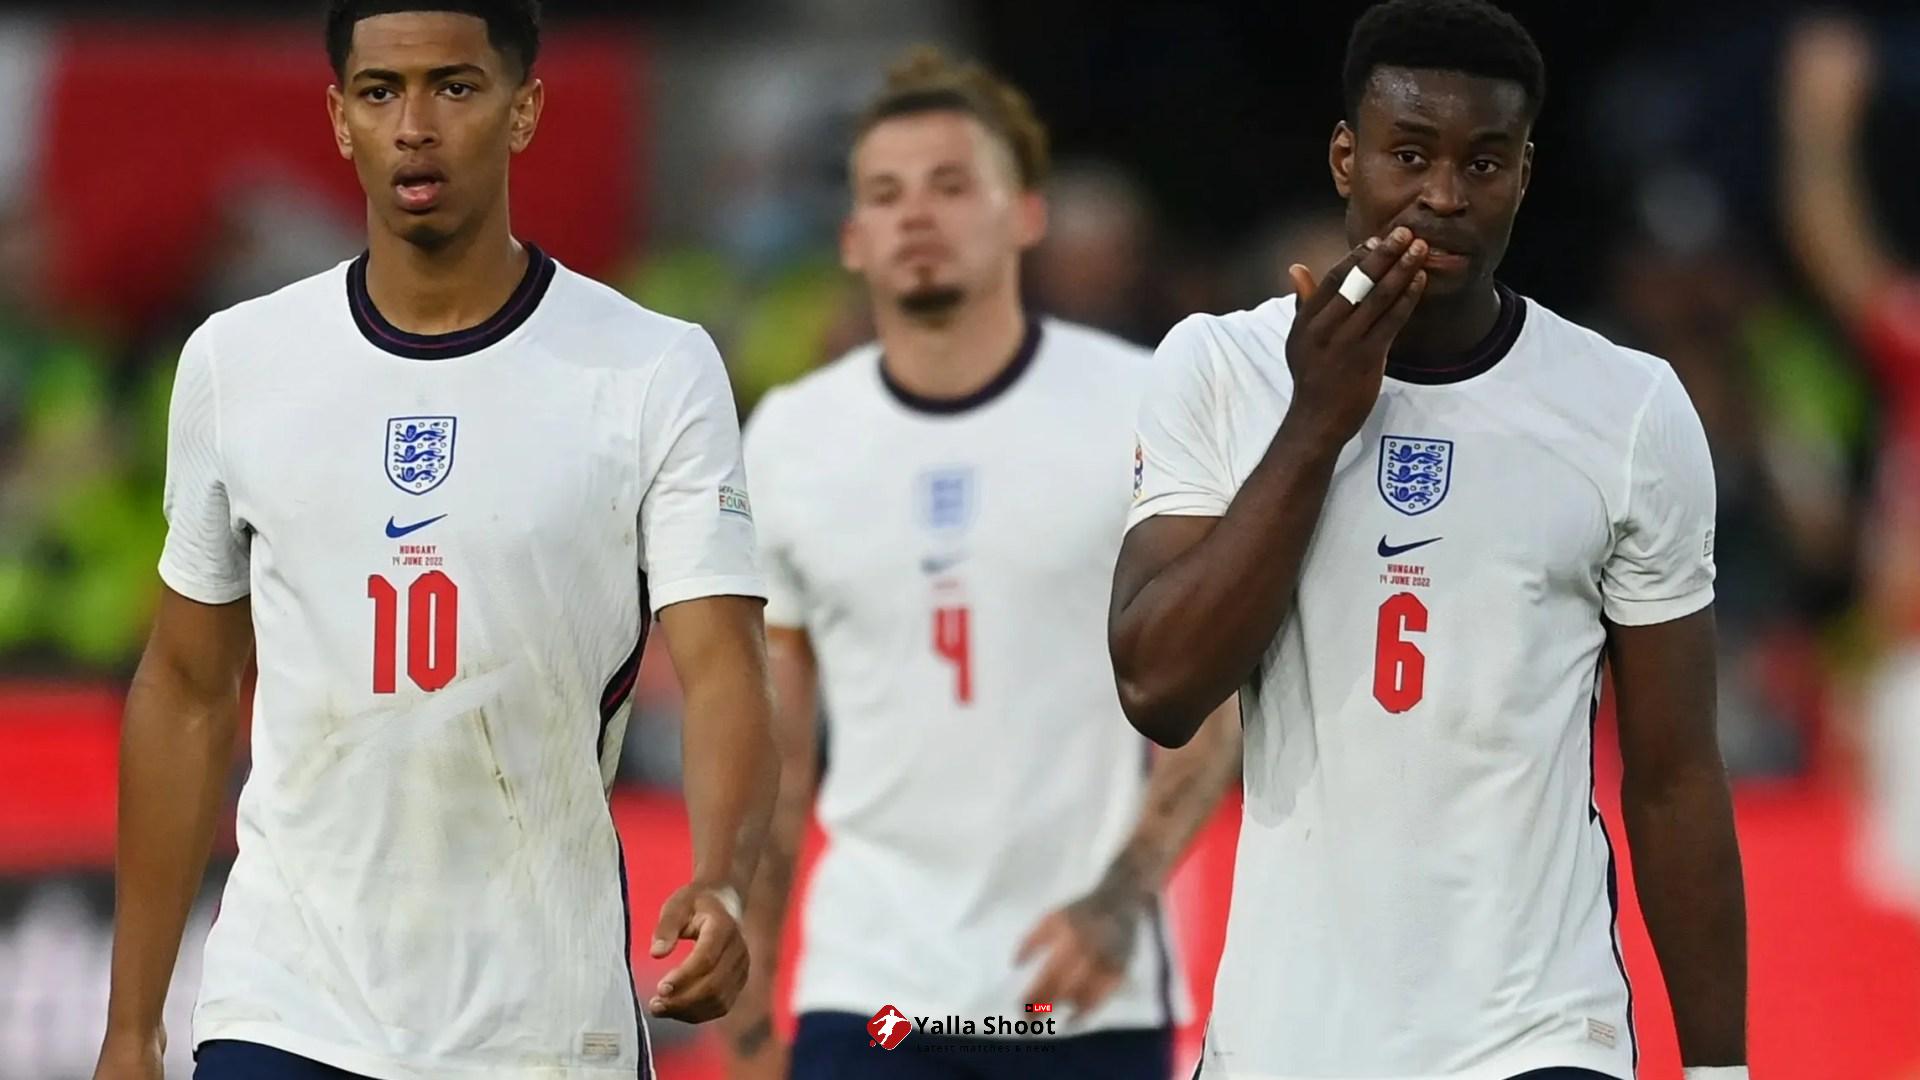 England face possible 2026 World Cup nightmare scenario after Nations League debacle comes back to haunt Three Lions